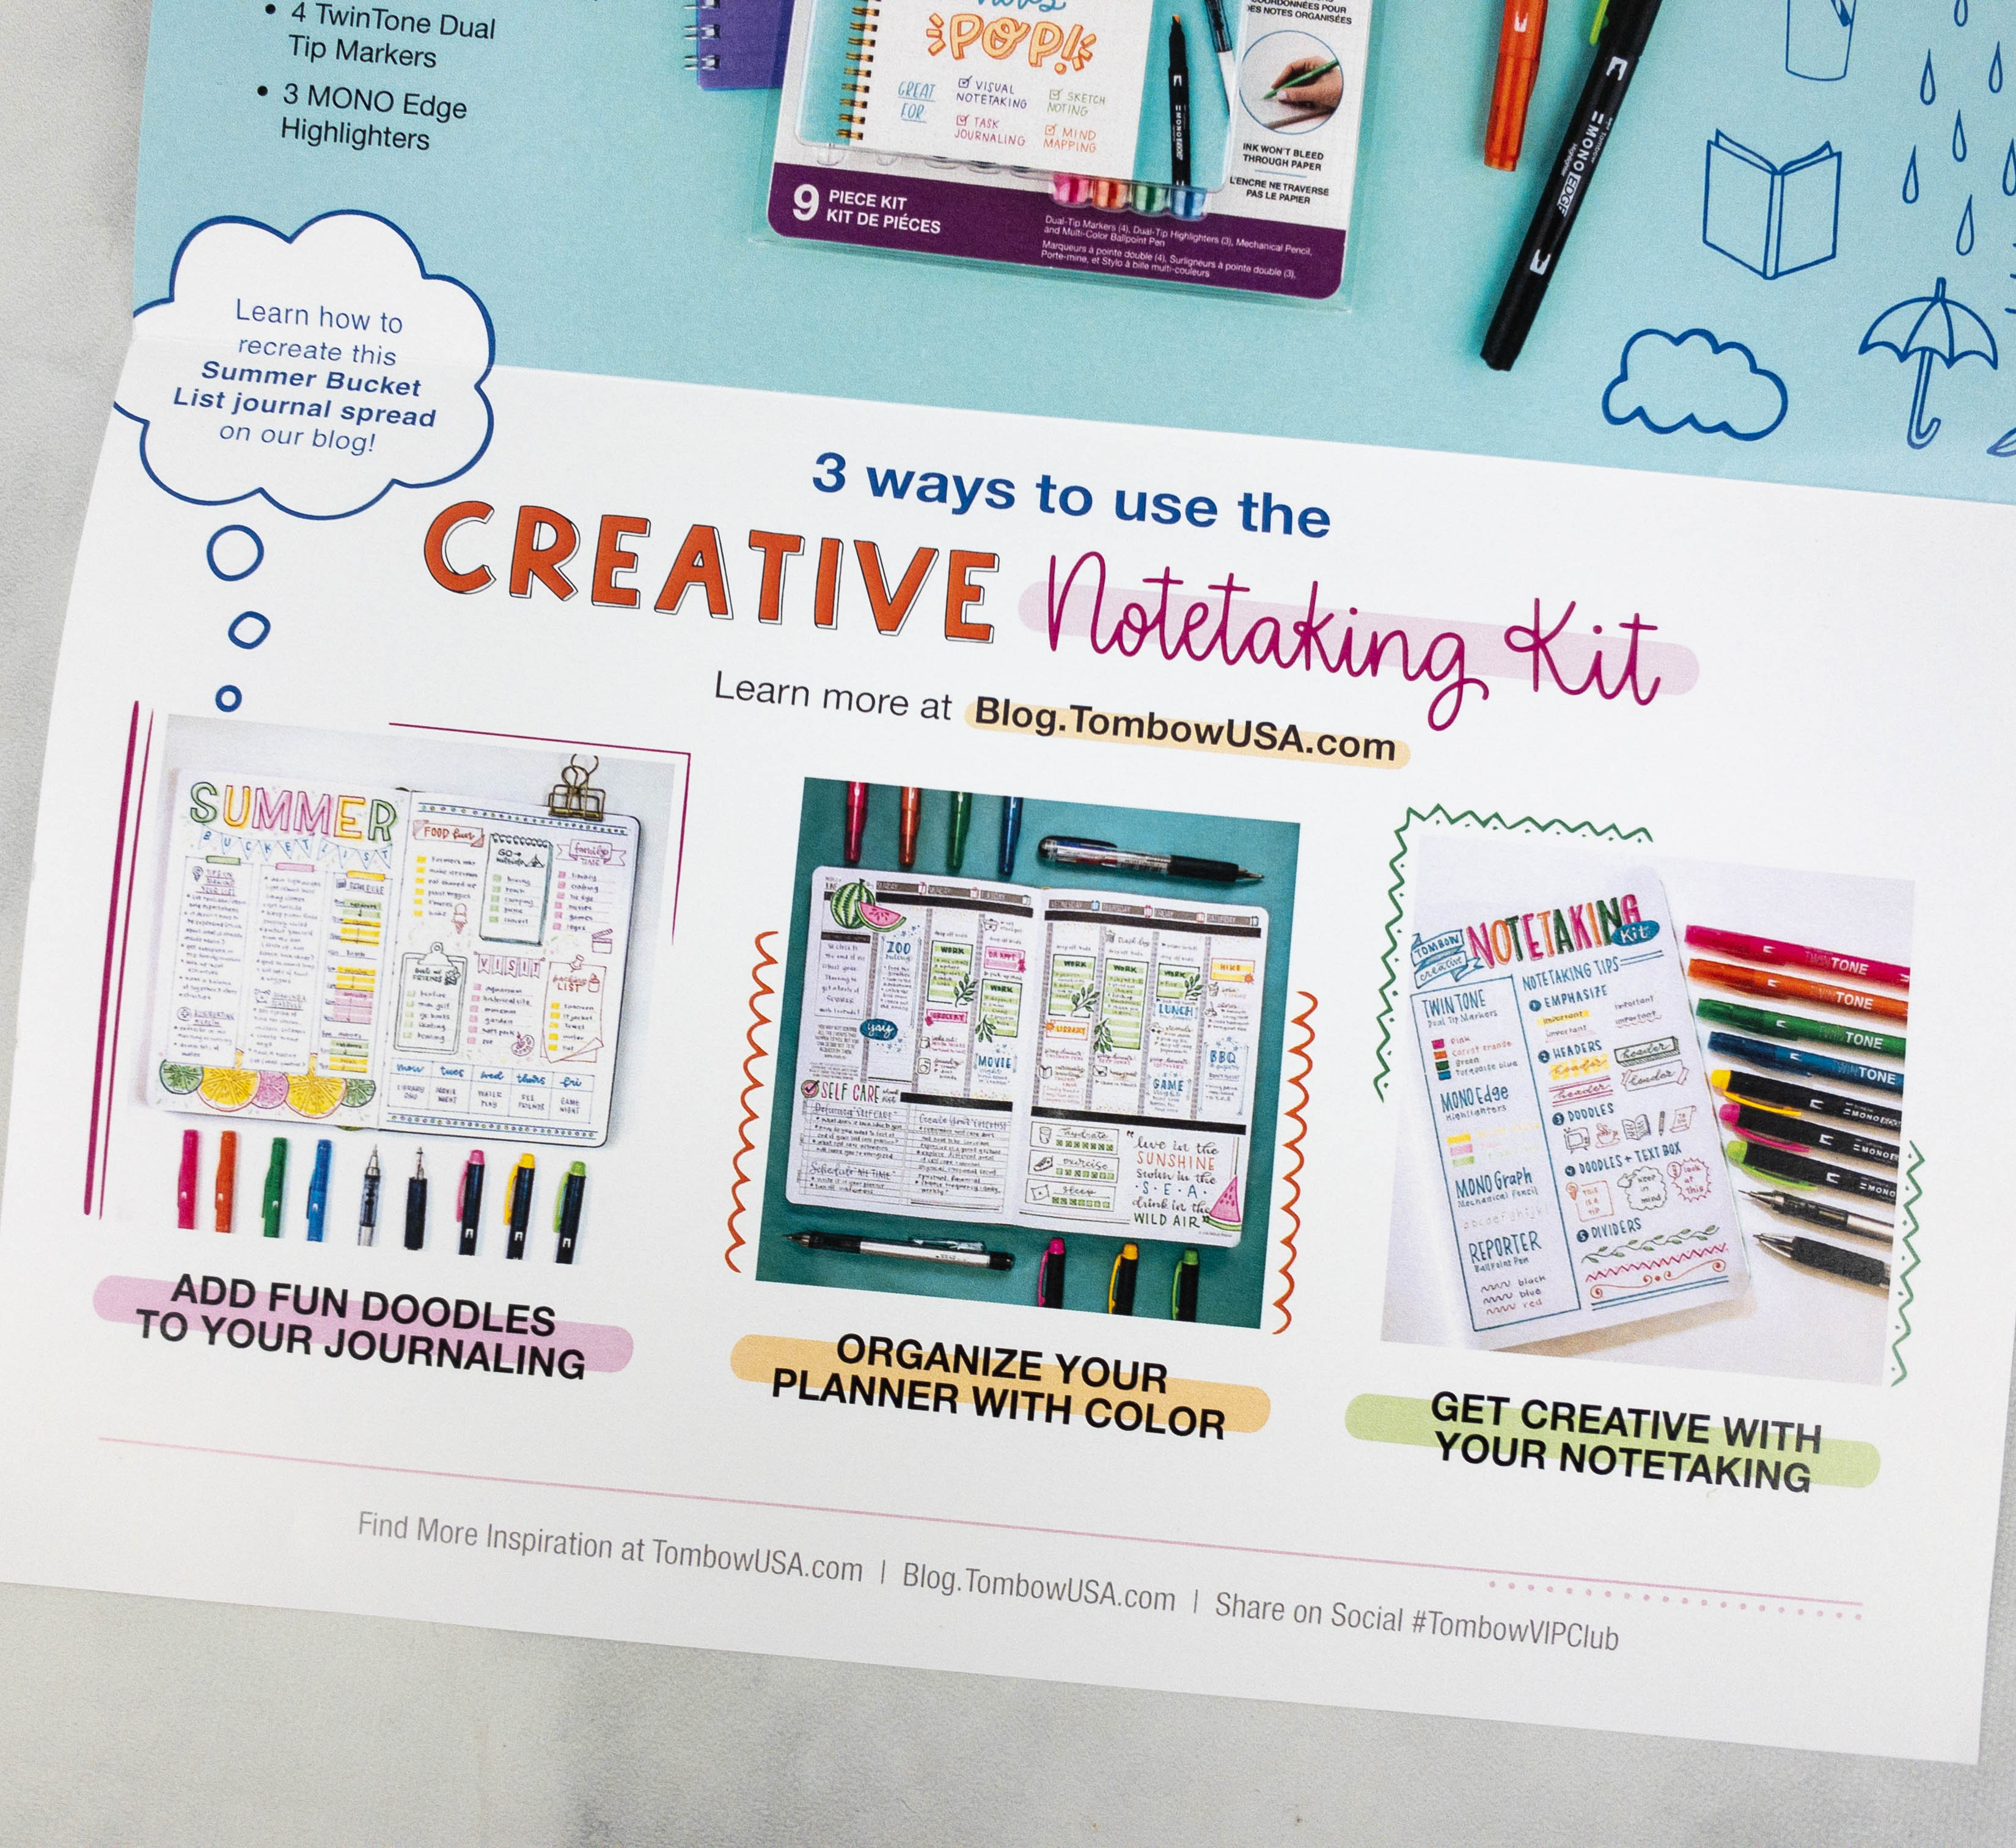 Learn to Doodle Kit by Tombow